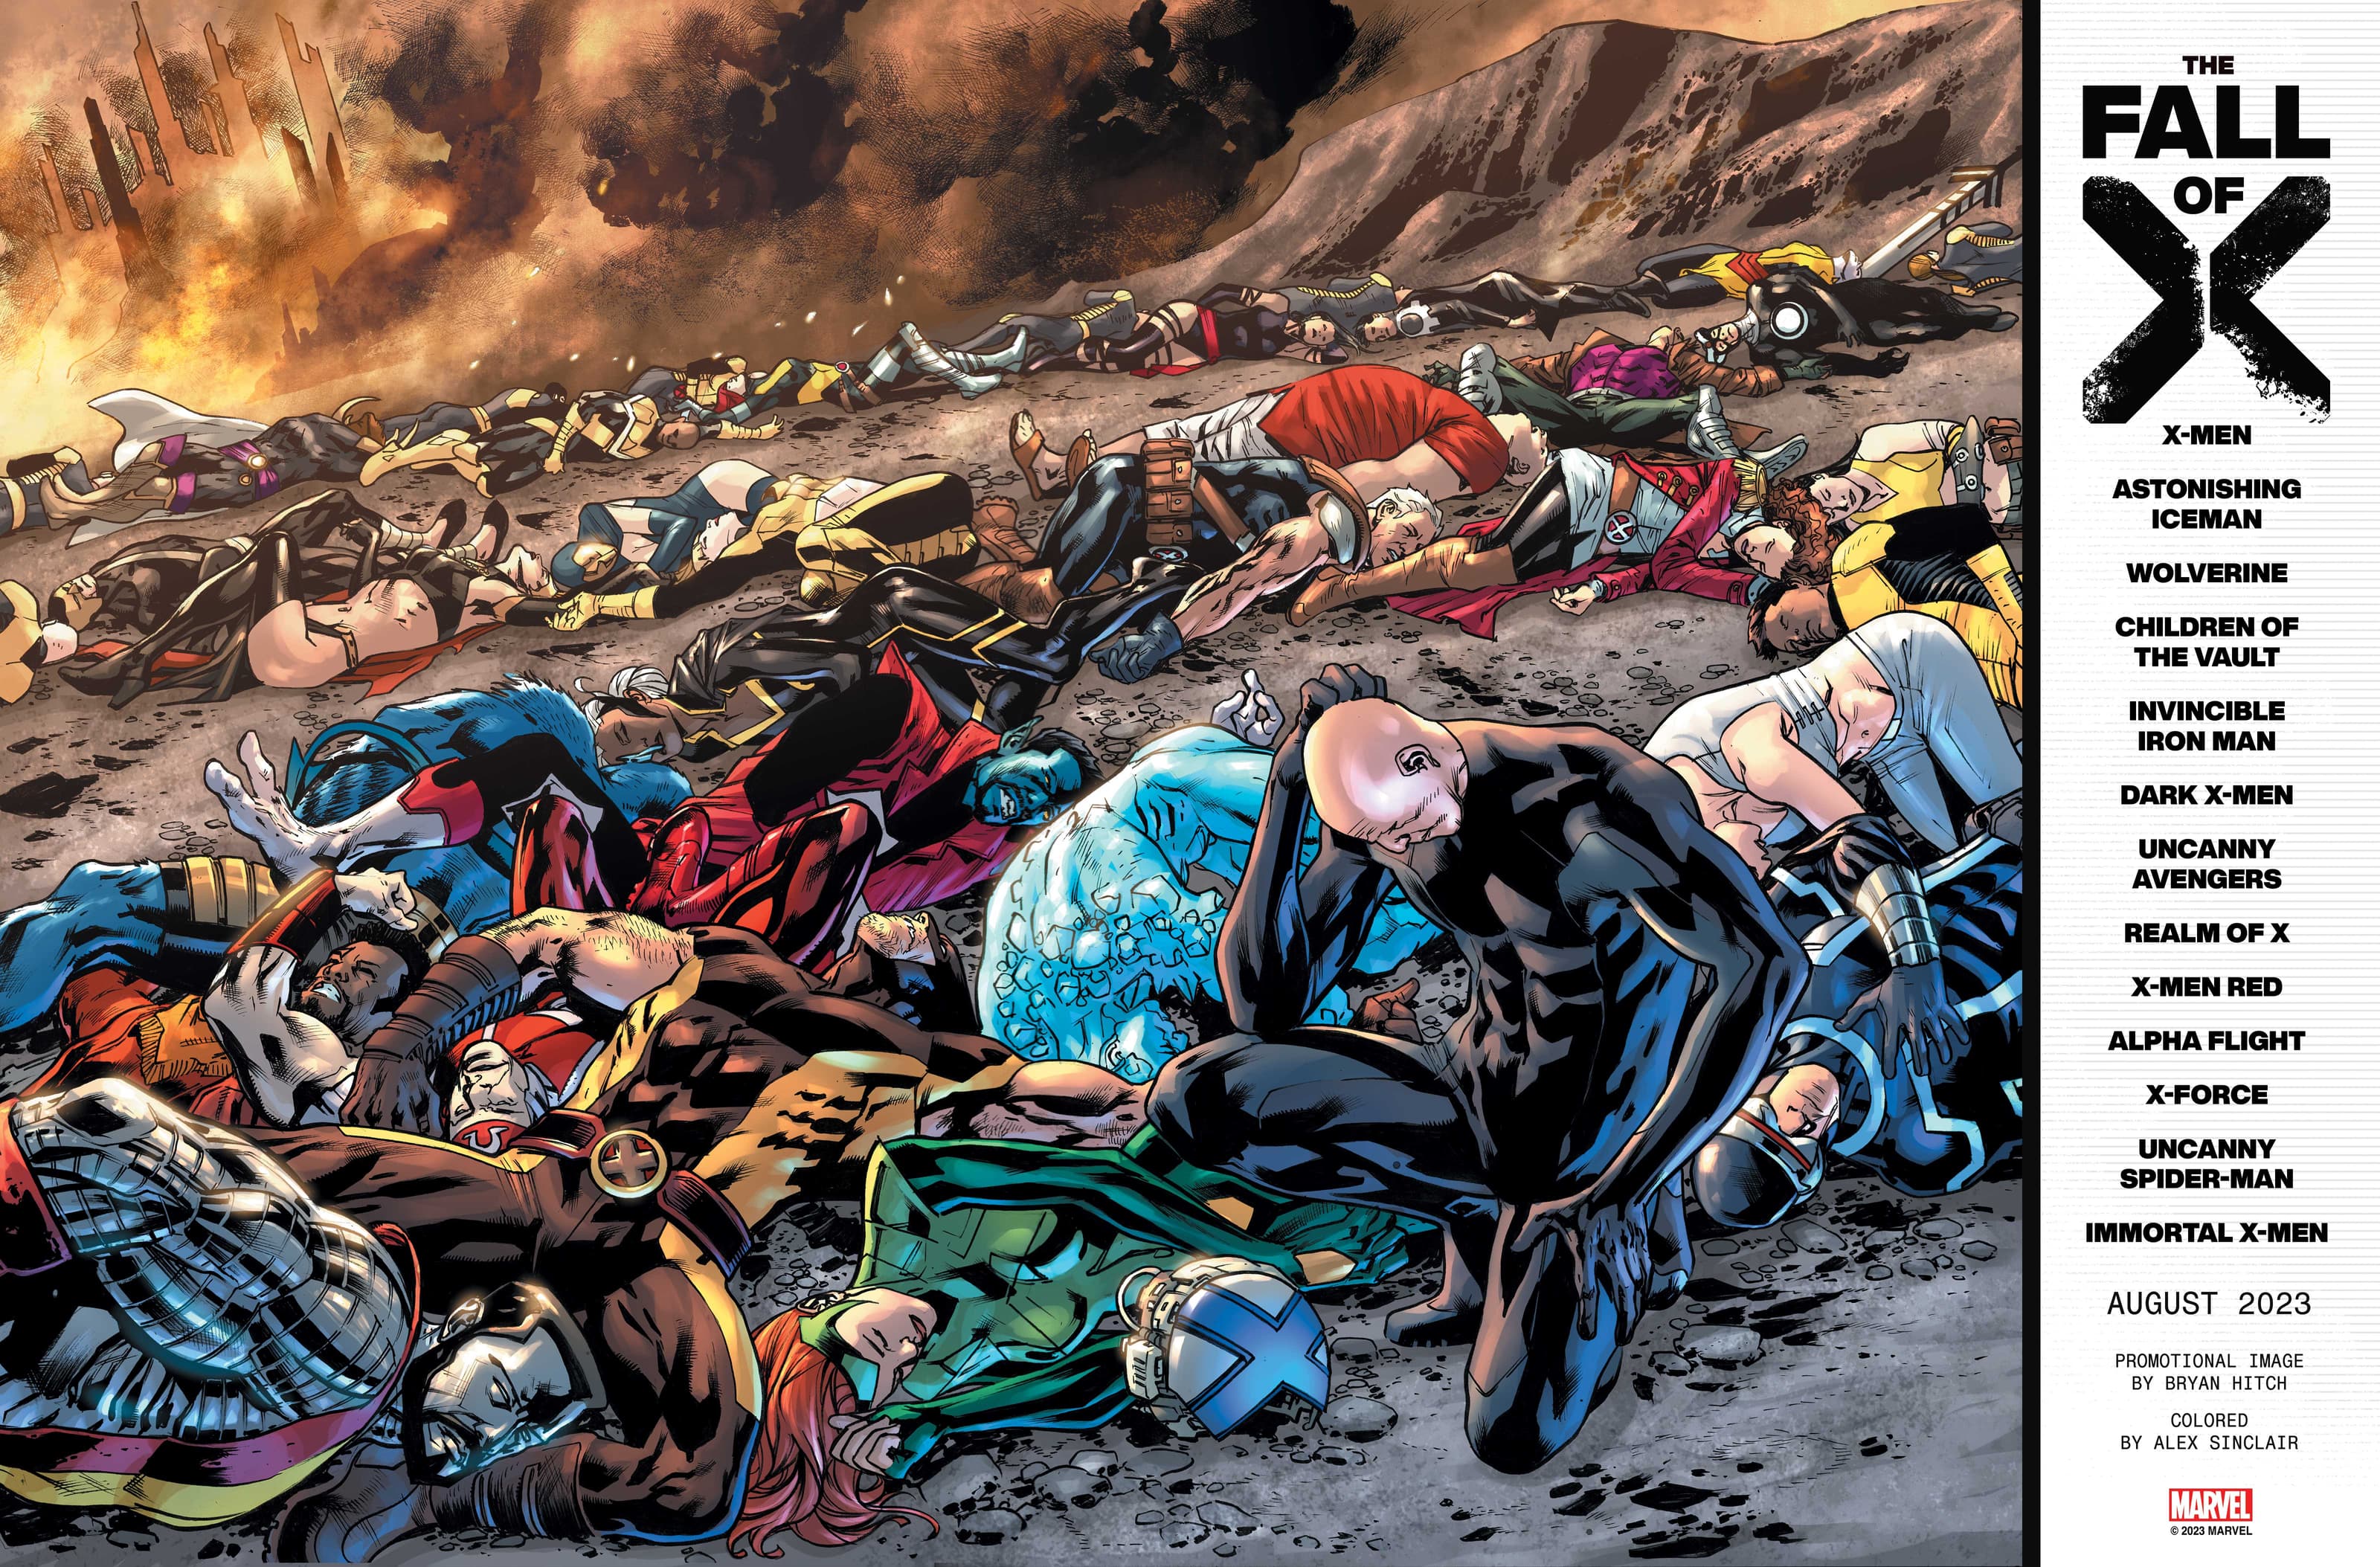 FALL OF X Promotional Image by Bryan Hitch and Alex Sinclair